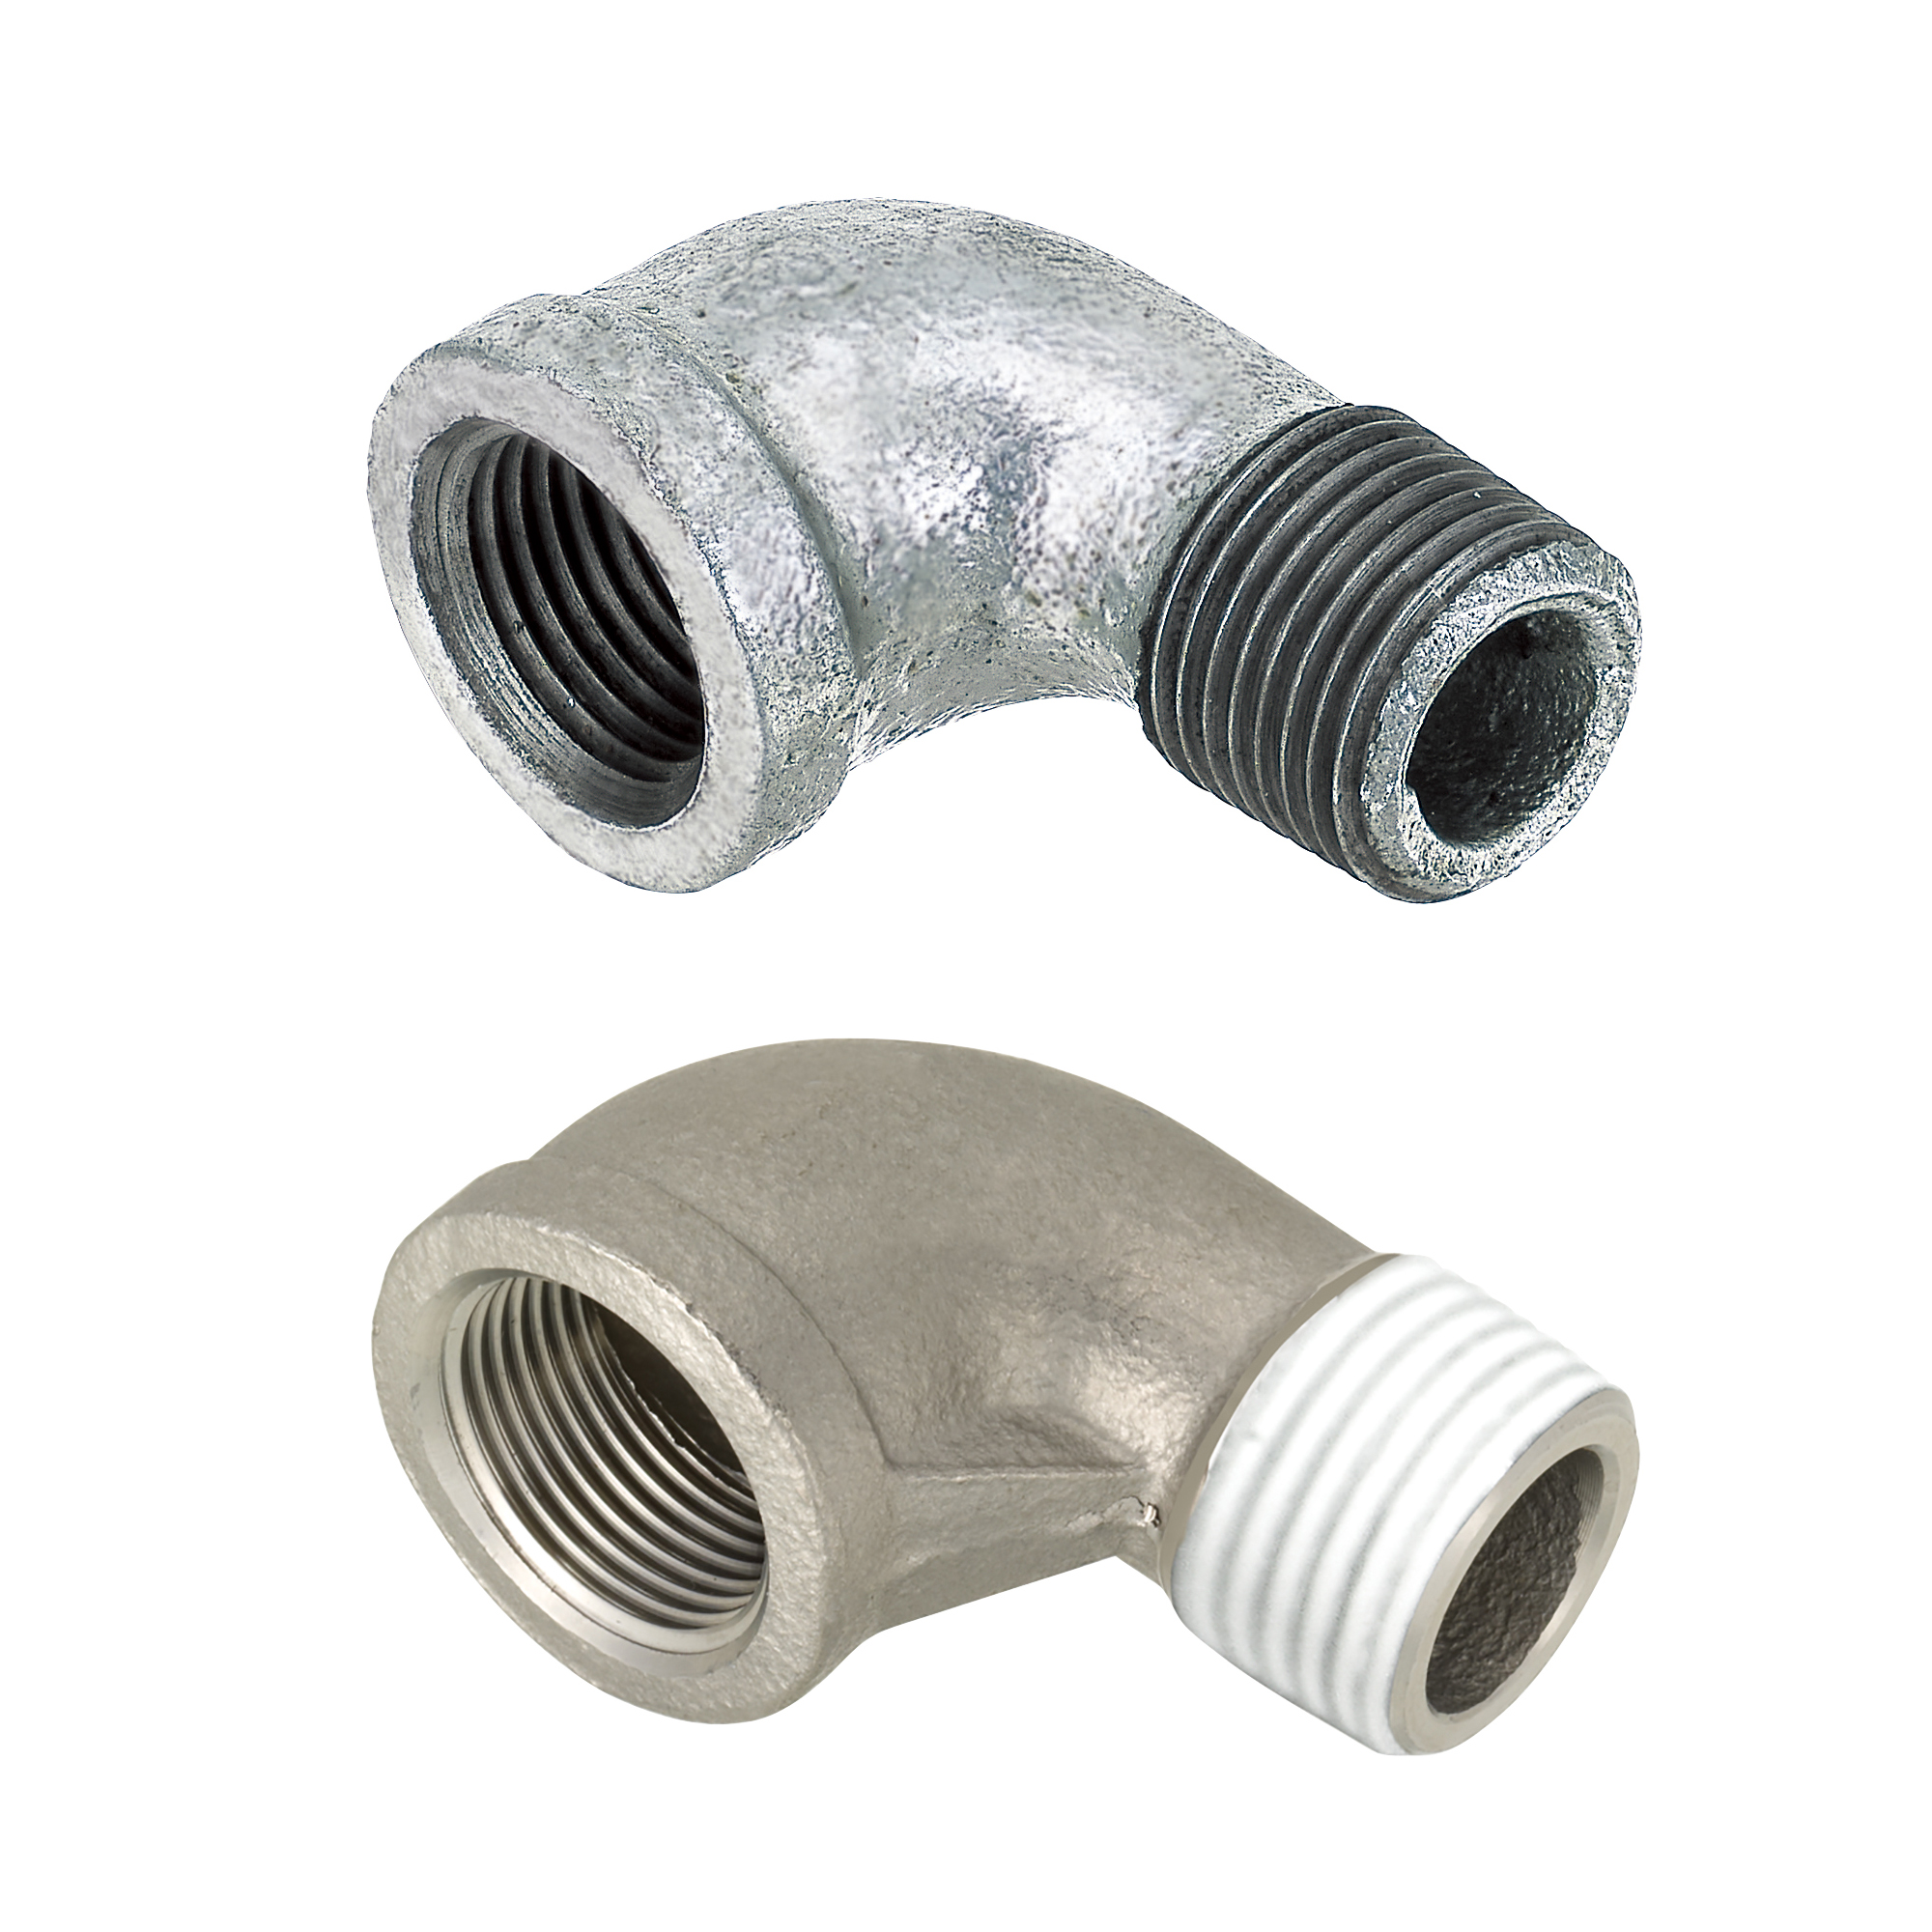 Low Pressure Fittings/90 Deg. Elbow/Threaded and Tapped (SGCEL25A) 